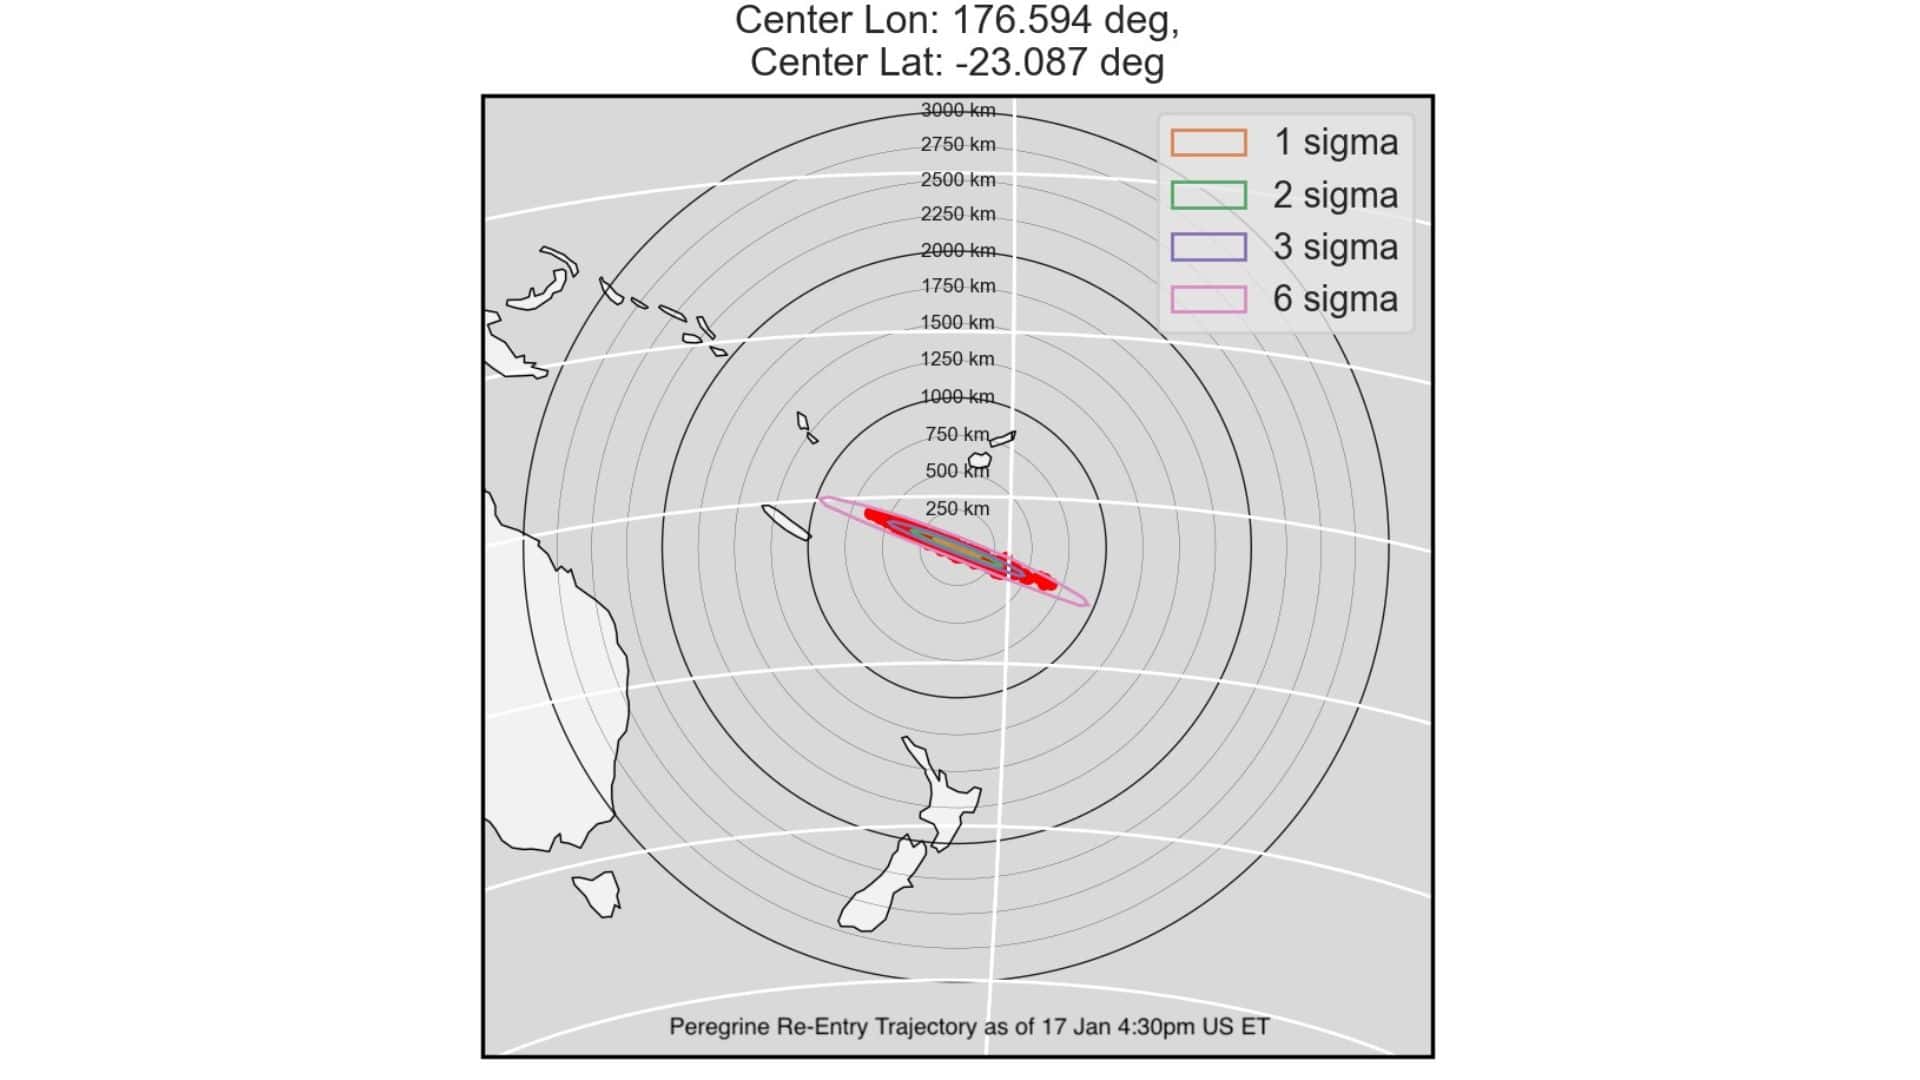 Re-entry trajectory of Peregrine spacecraft into the Earth's atmosphere over a remote area of the South Pacific